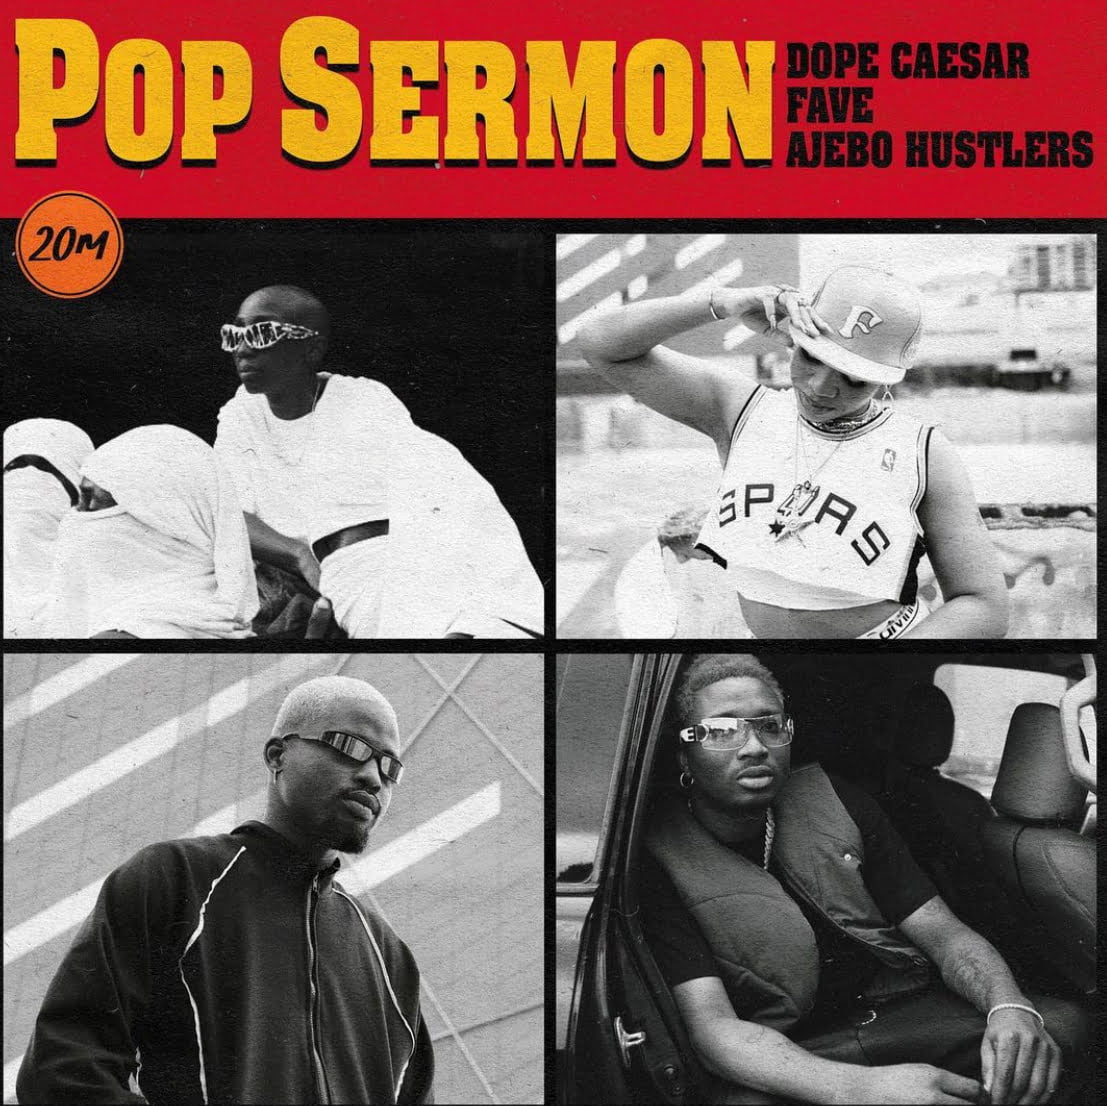 New Music: Dope Caesar feat. Fave and Ajebo Hustlers — Pop Sermon